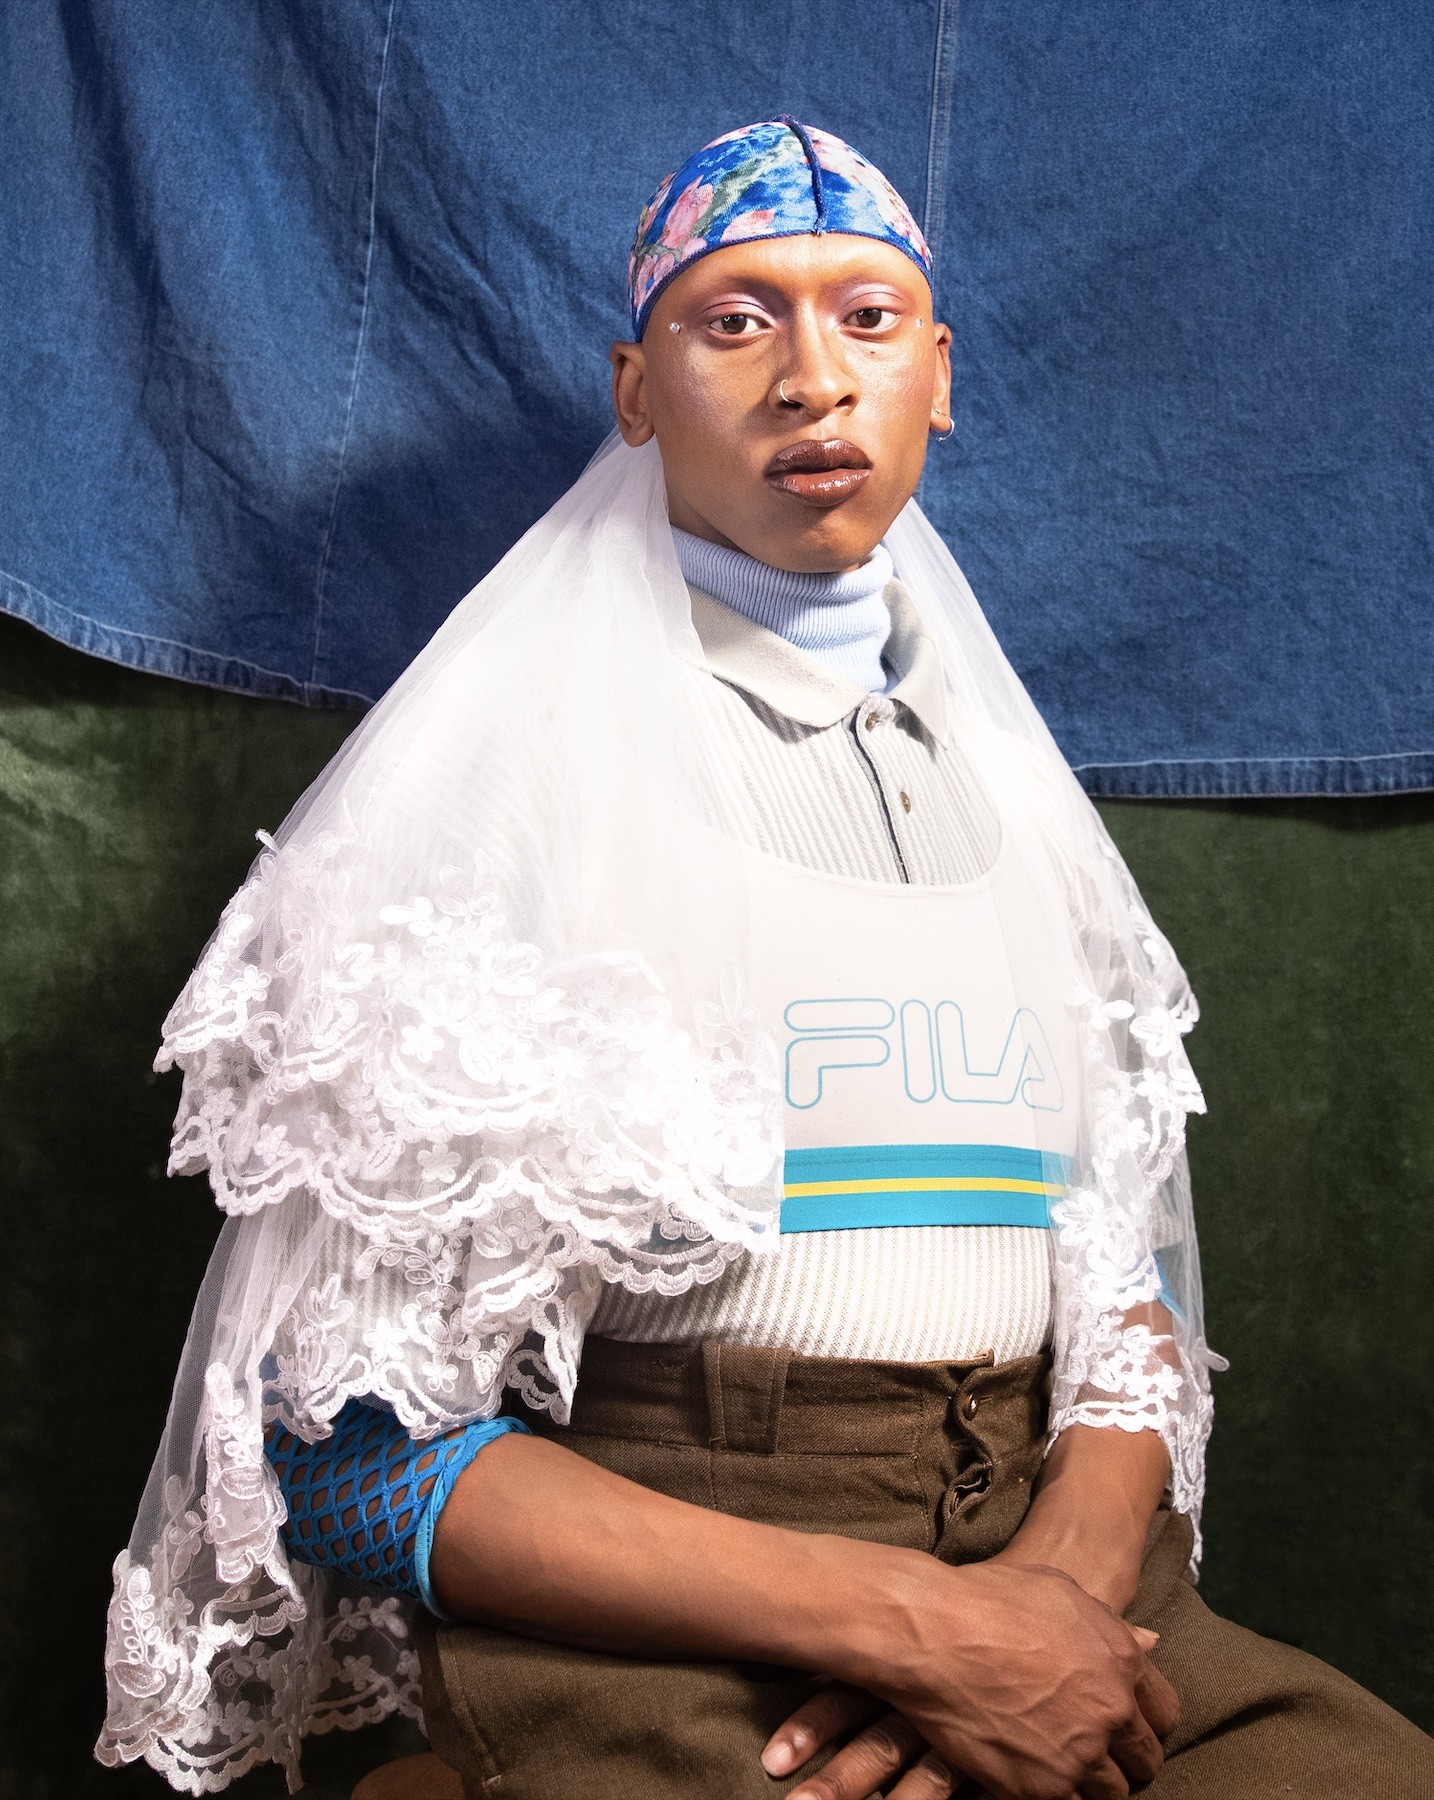 Golden is seated with their hands crossed in their lap in front of a denim and canvas backdrop. They are wearing a blue floral durag with a white lace veil pulled back.